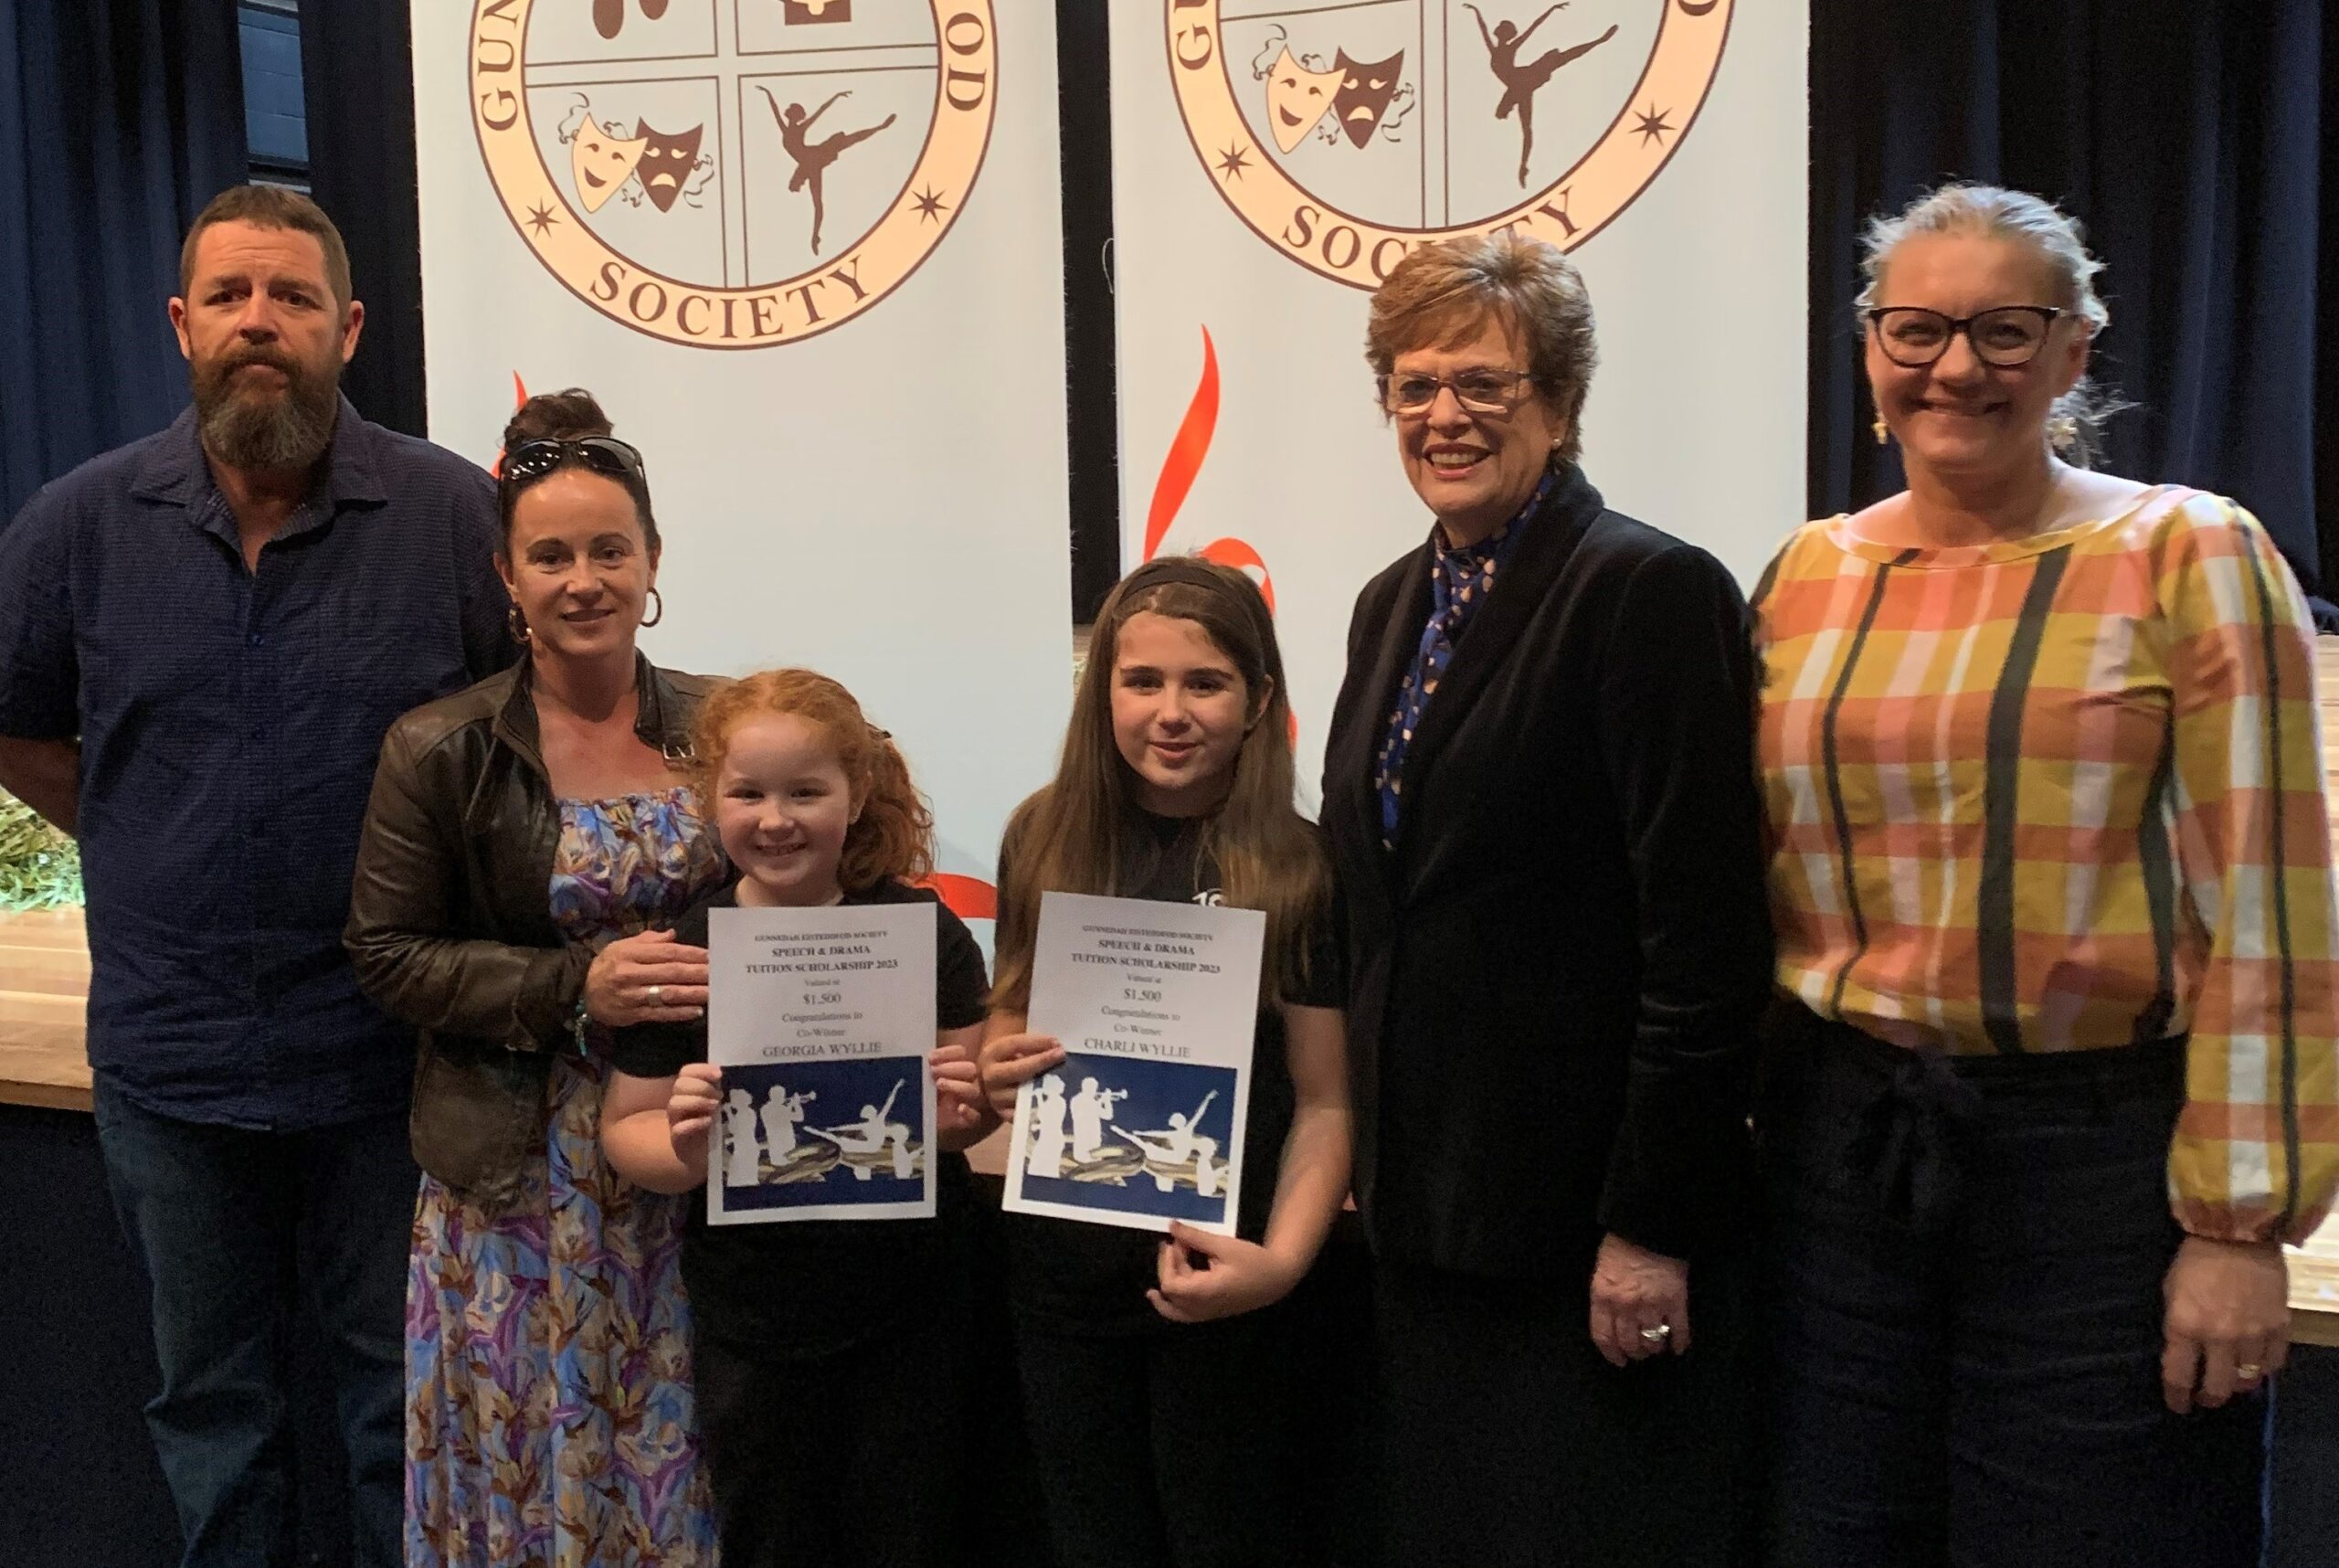 Young talent rewarded at eisteddfod